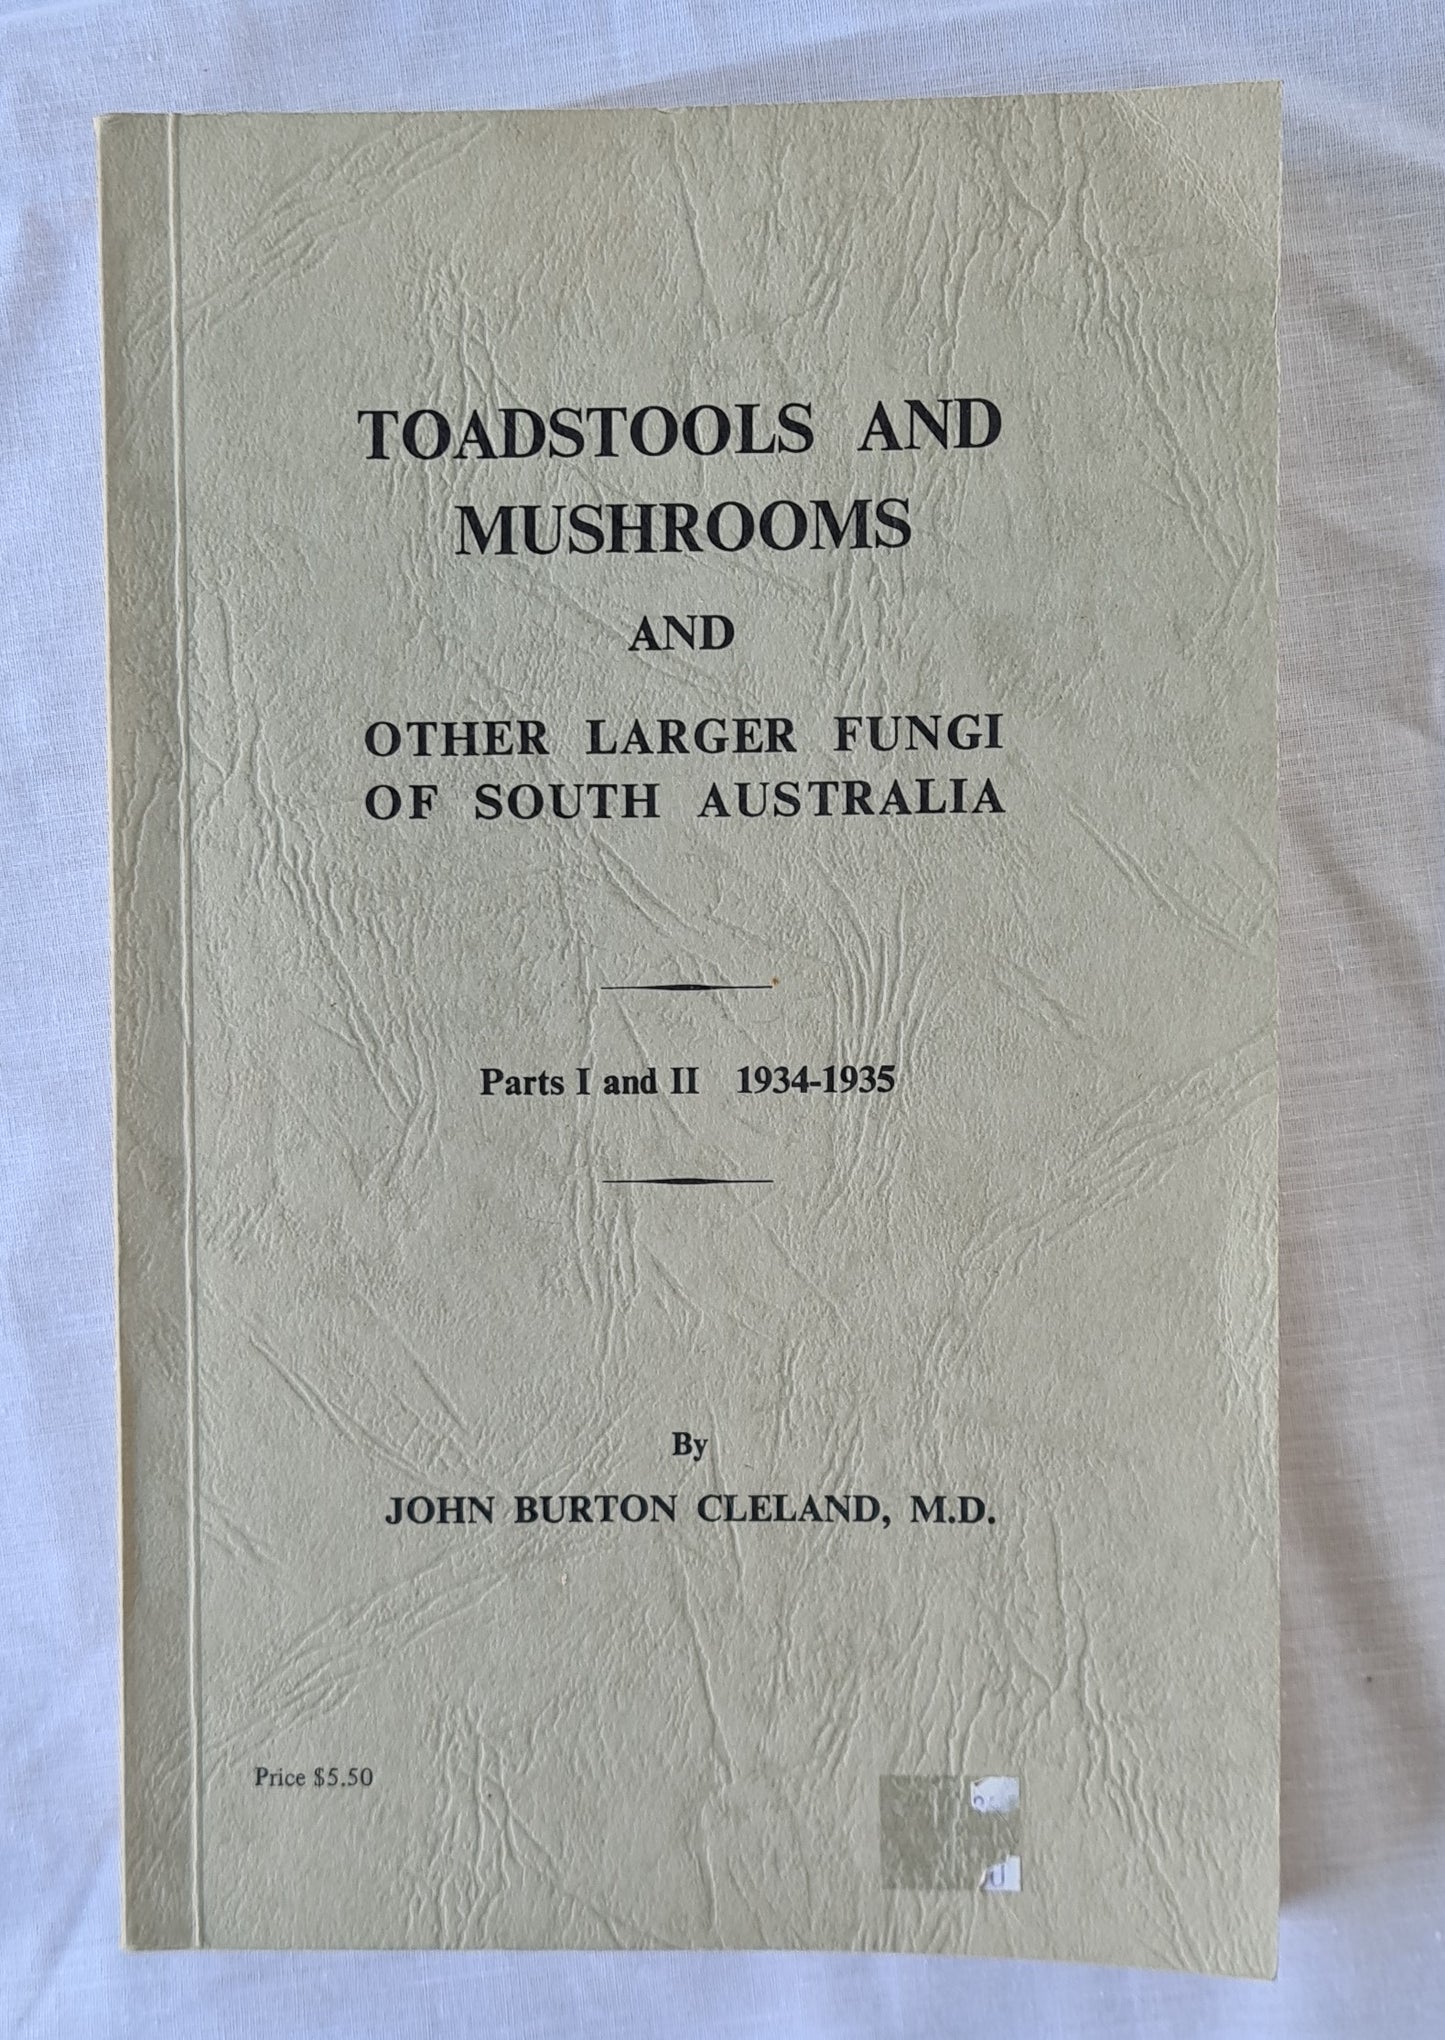 Toadstools and Mushrooms  And Other Larger Fungi of South Australia  Parts I and II 1934-1935  by John Burton Cleland